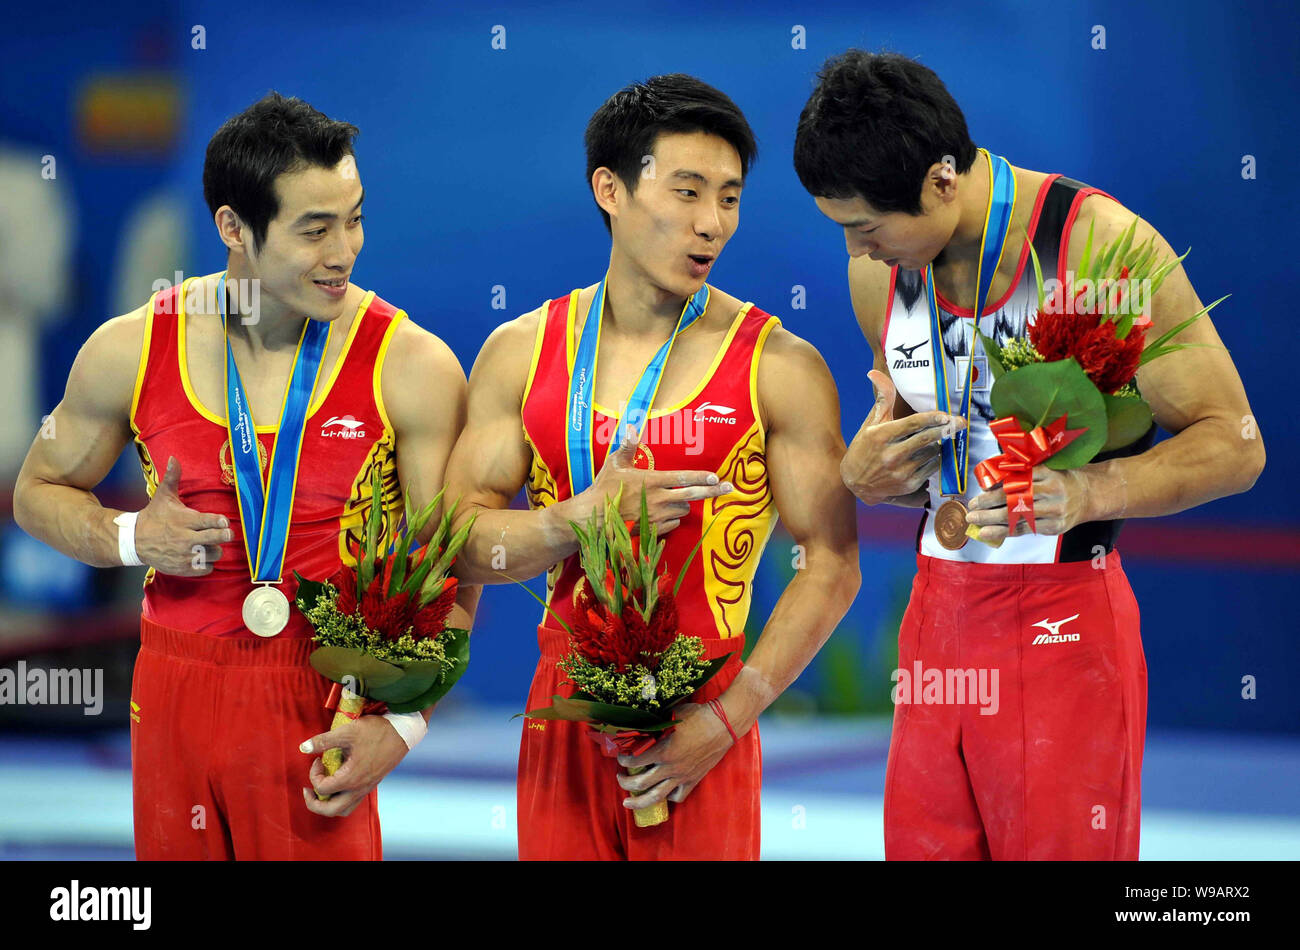 (From left) Chinas Lv Bo (silver medalist), Chinas Teng Haibin (gold medalist) and Hisashi Mizutori of Japan (bronze medalist) stand on the podium dur Stock Photo